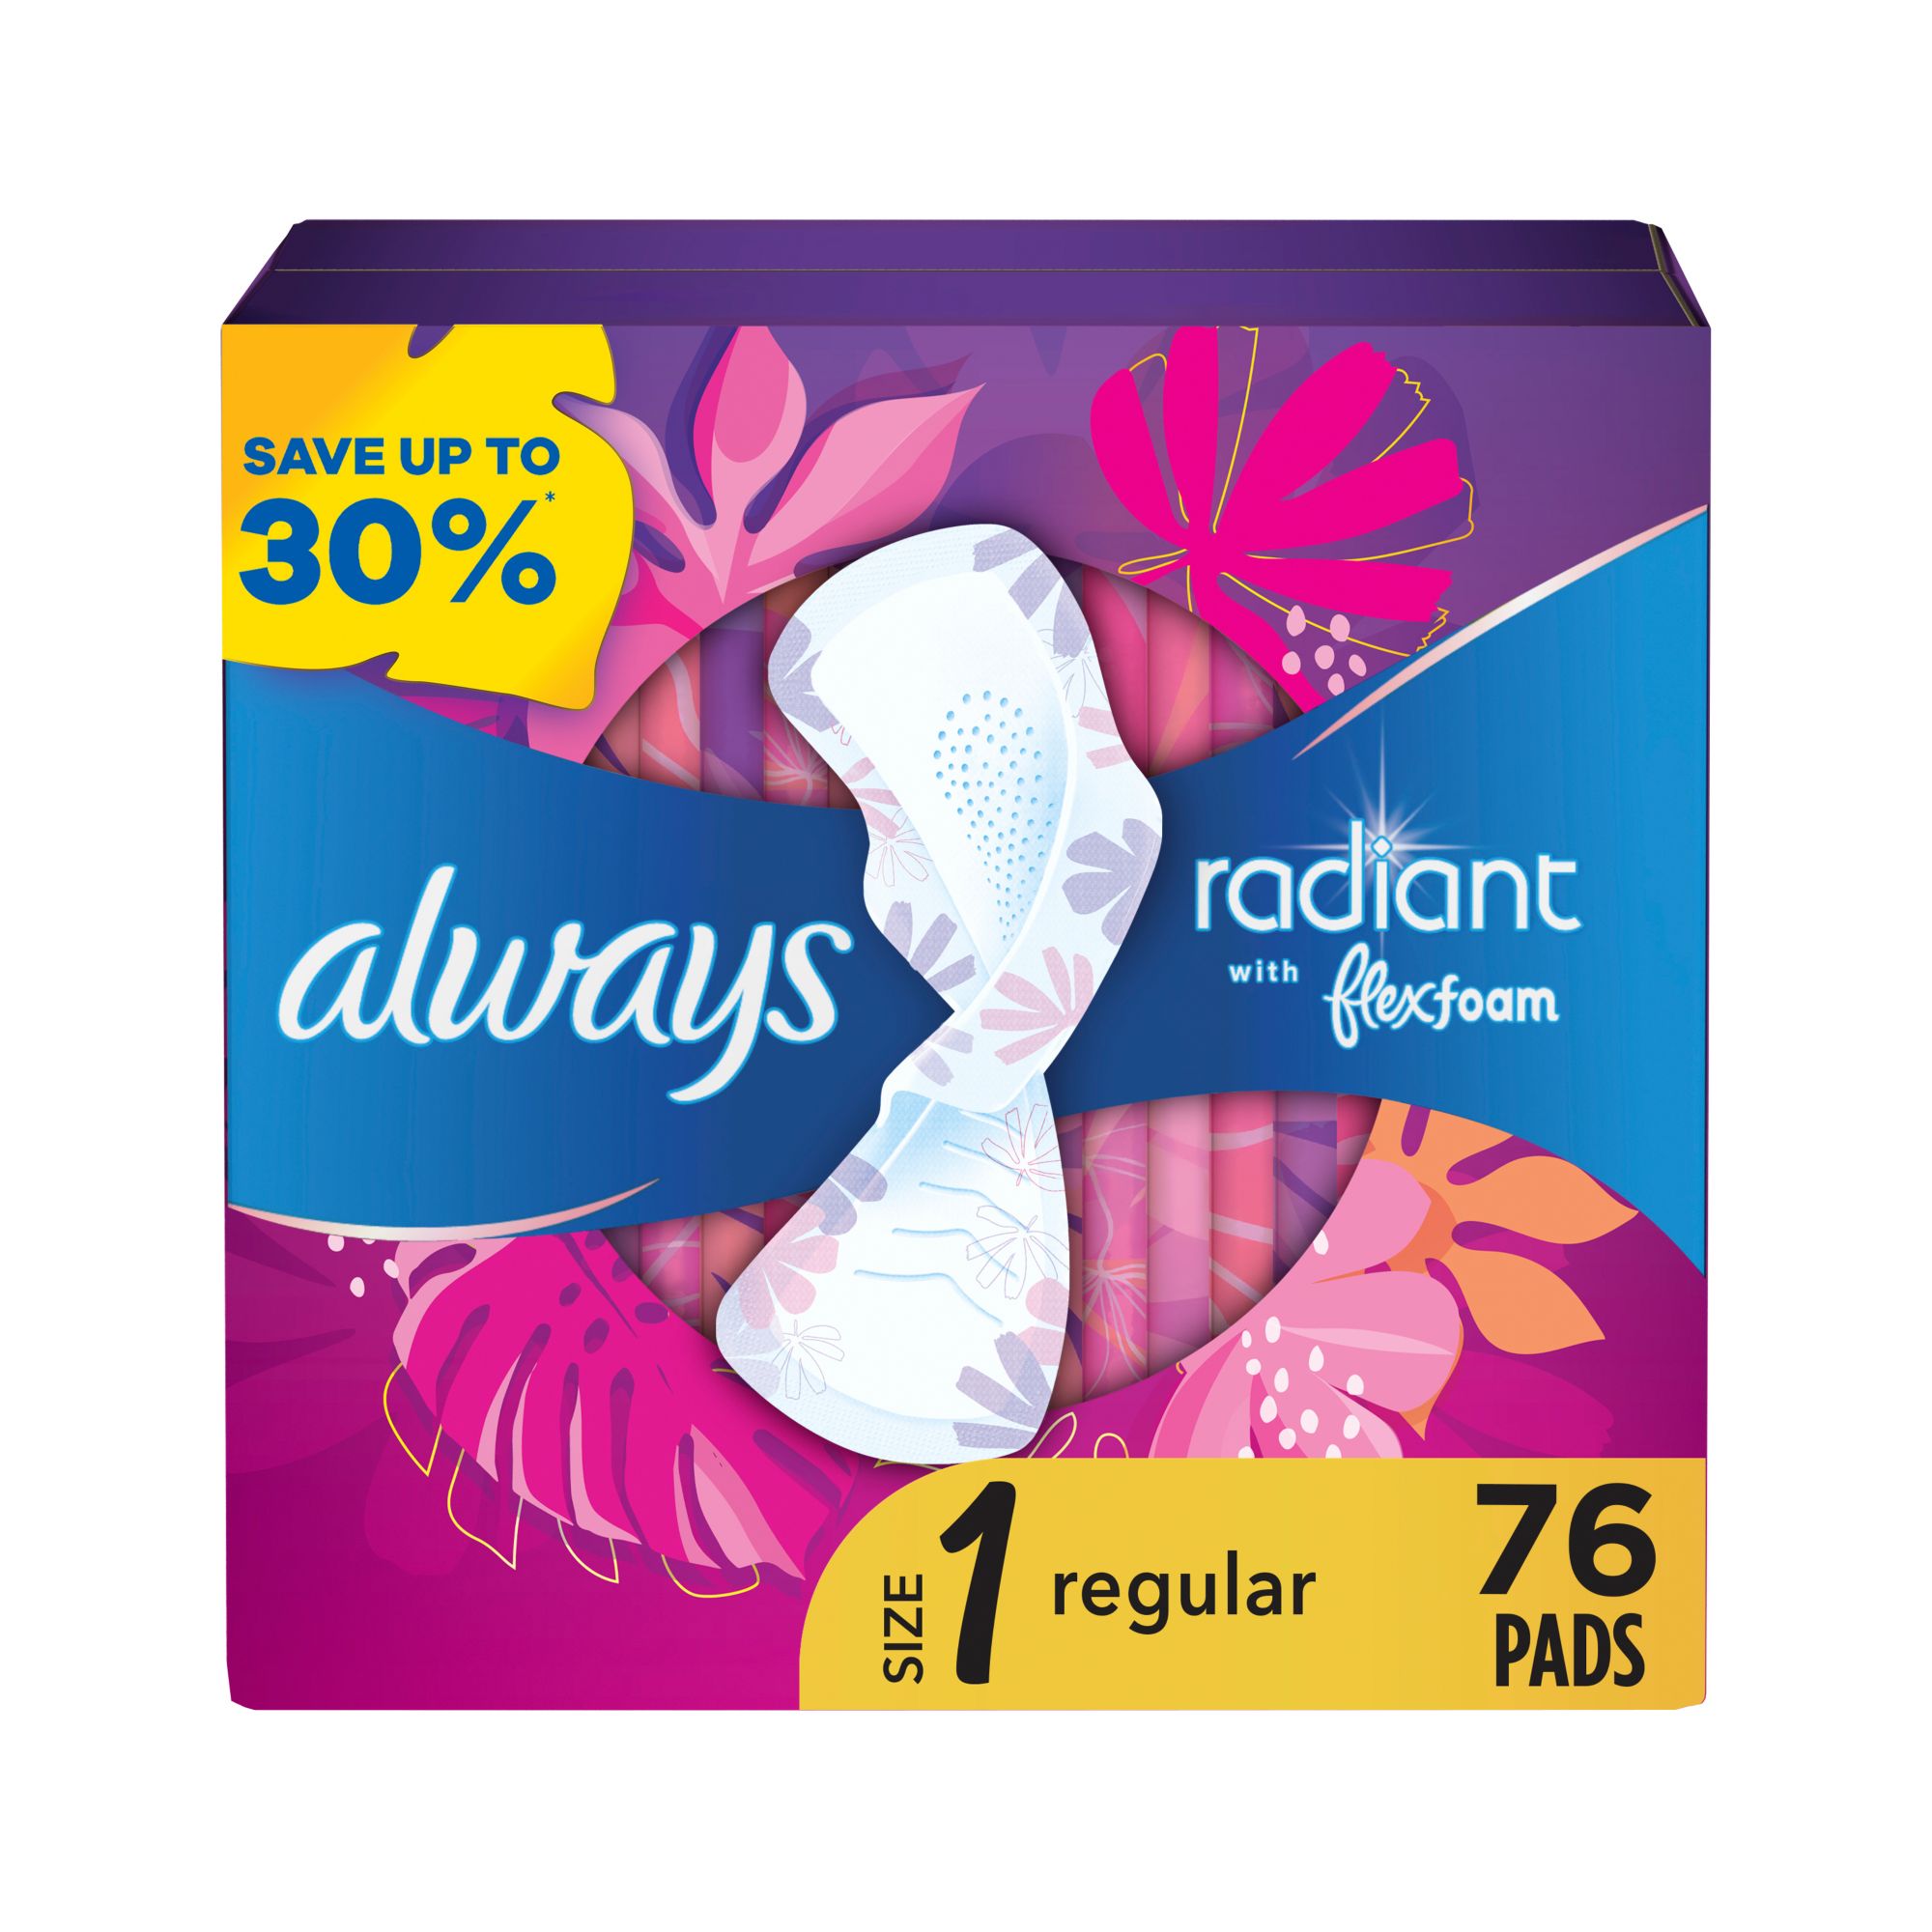 Always Maxi Extra Heavy Overnight Pads, Unscented, 54 Ct 